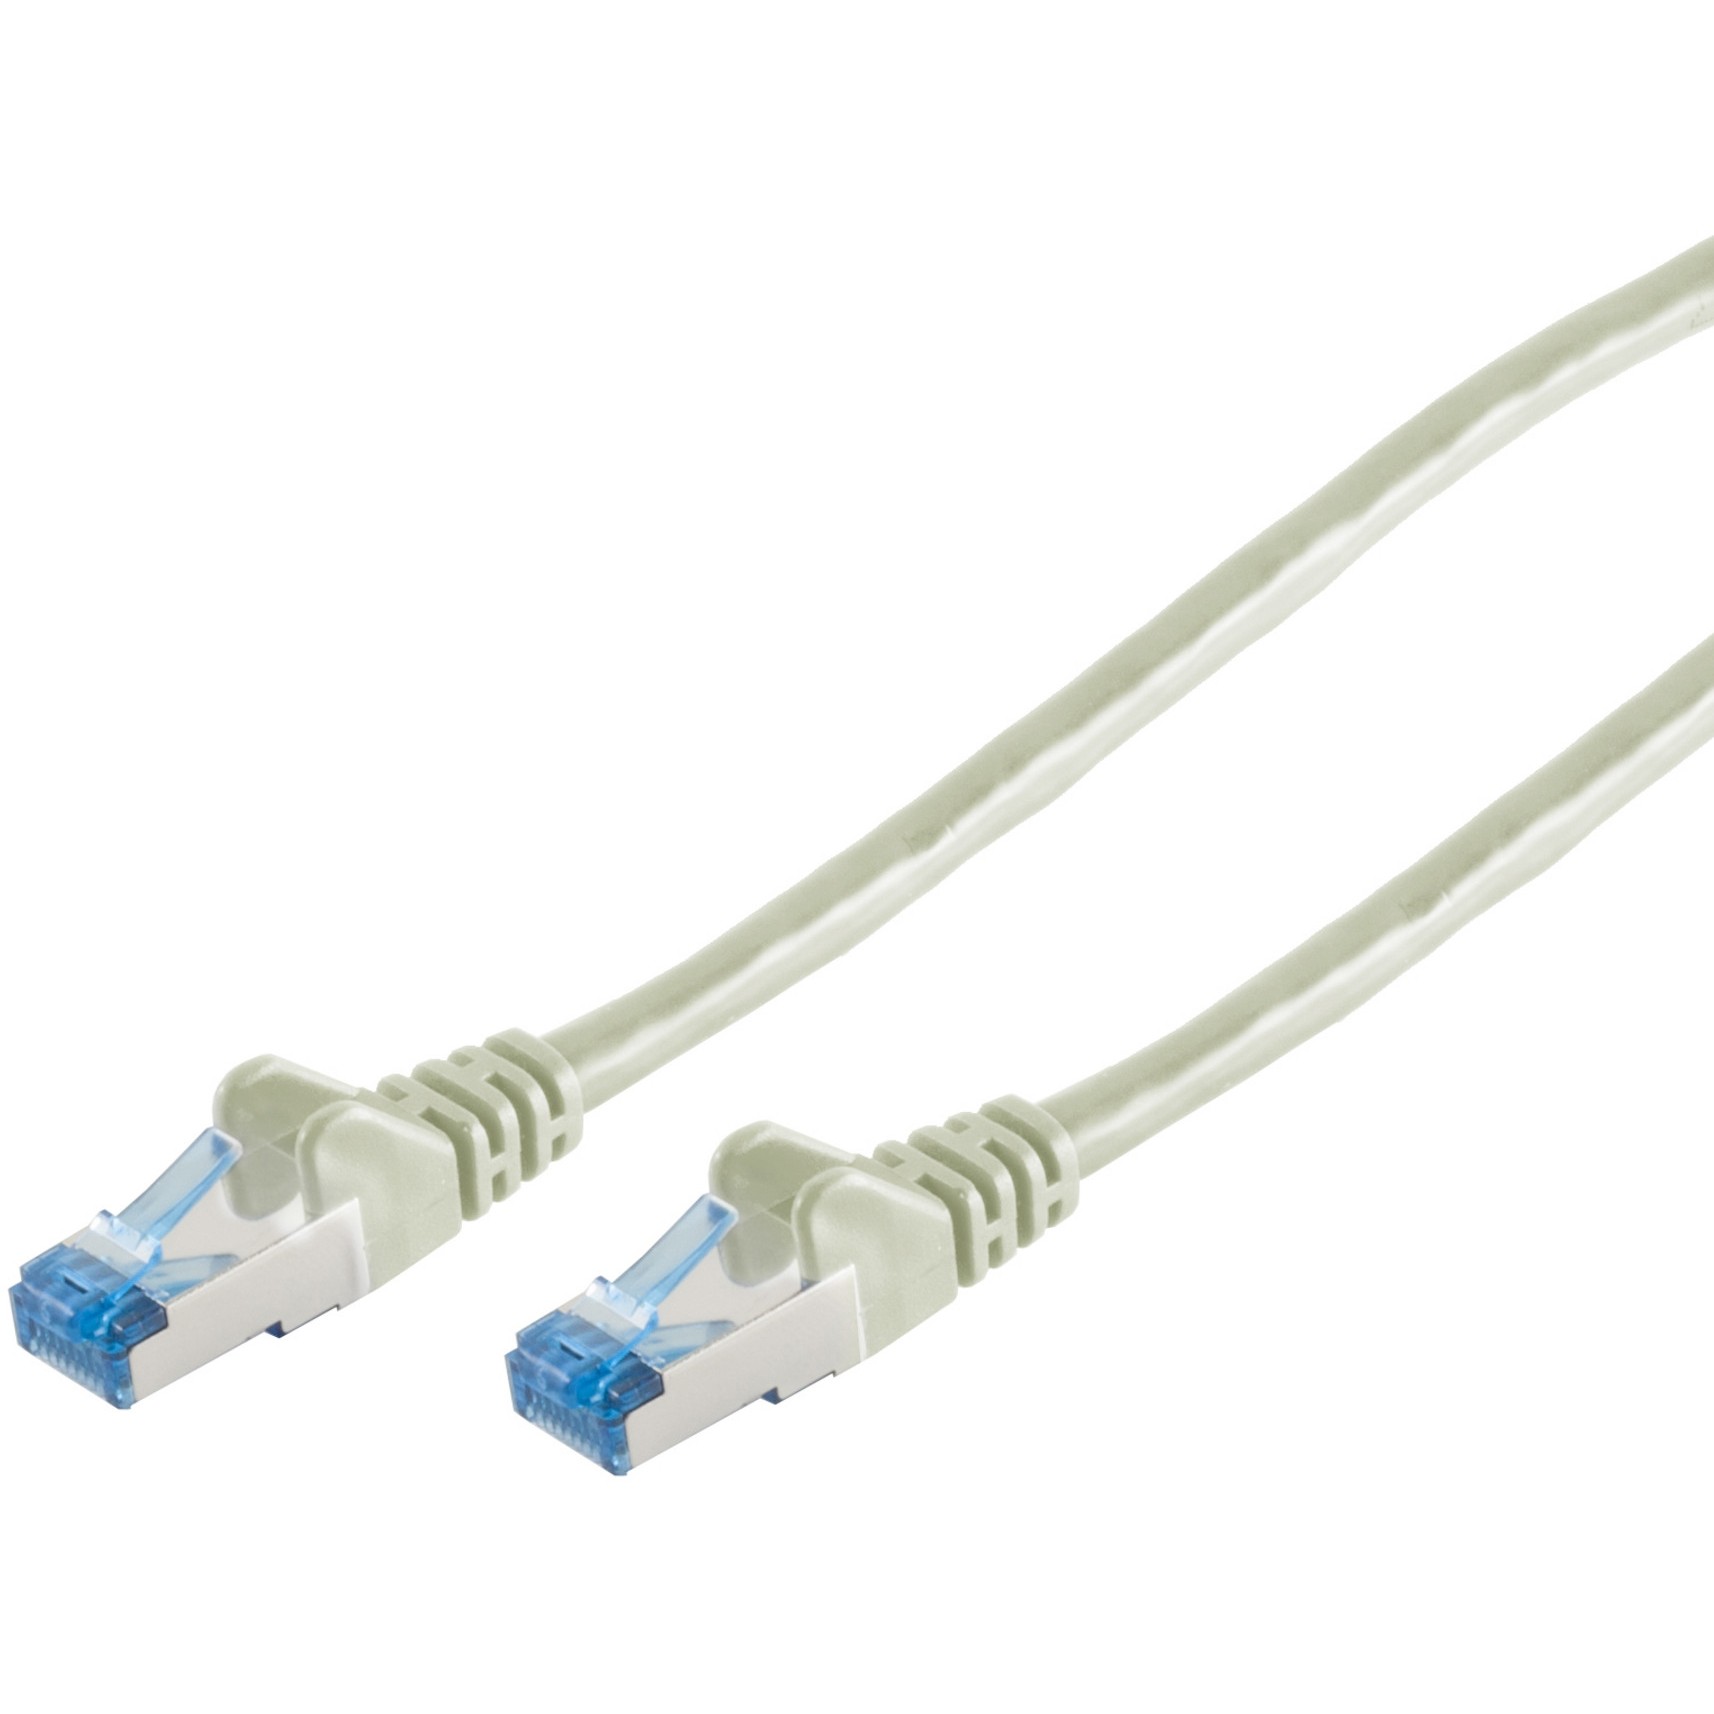 S-Conn 75711 – 0.25 cavo Patch grau 20 m networking cable - 75726